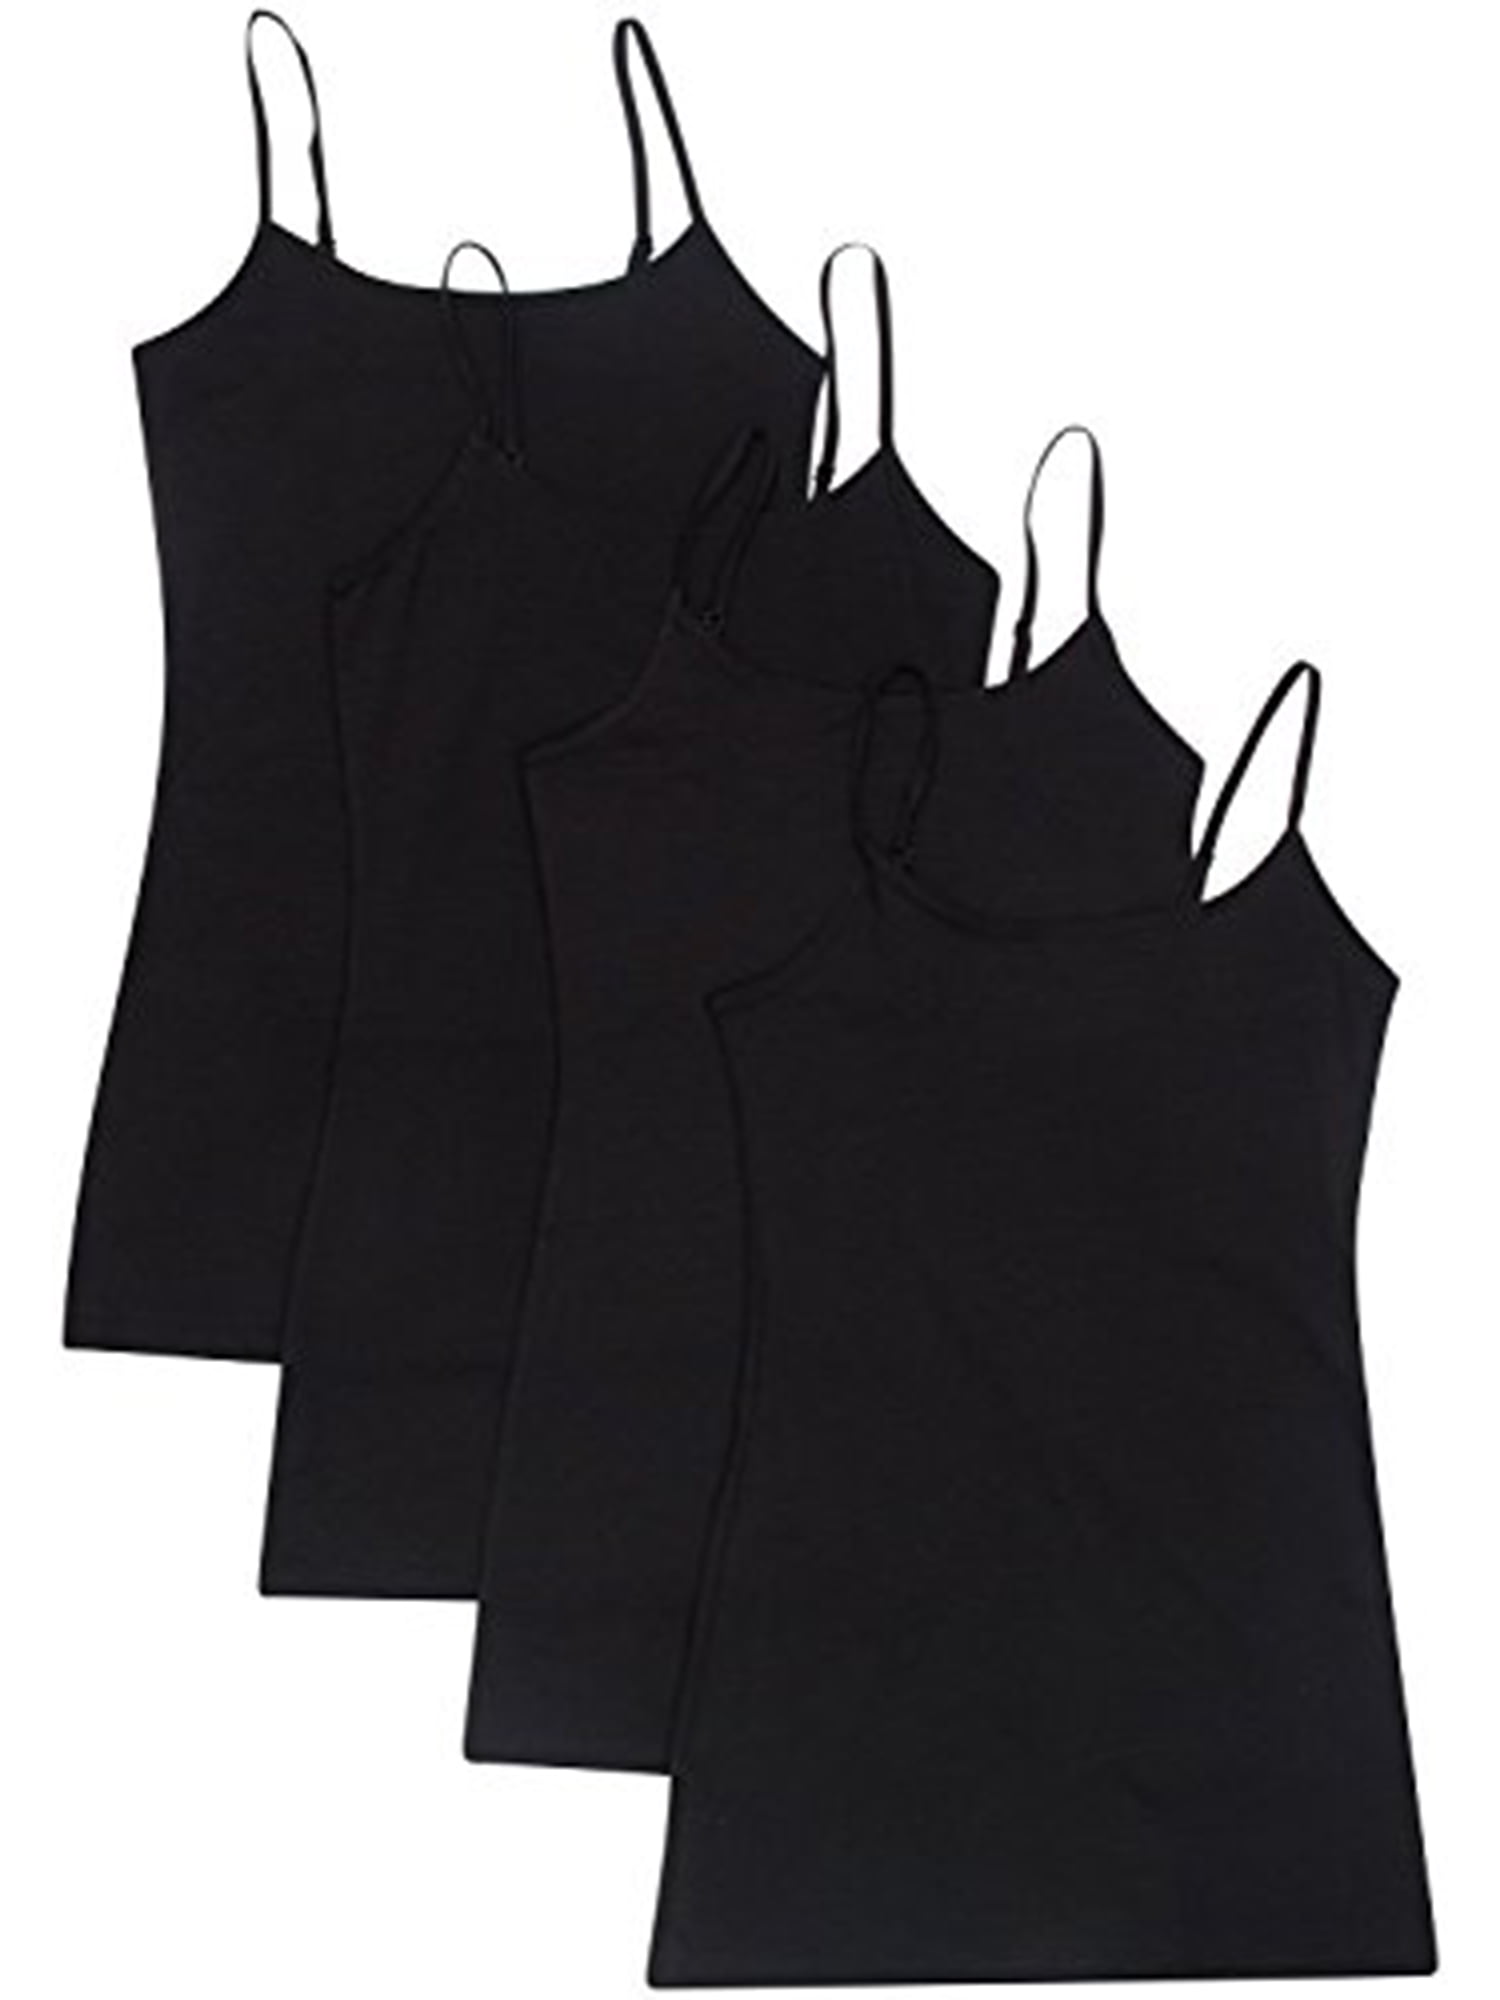 Essential Basic Women Value Pack Long Camisole Cami - Black, Black, Black,  Black, Small 